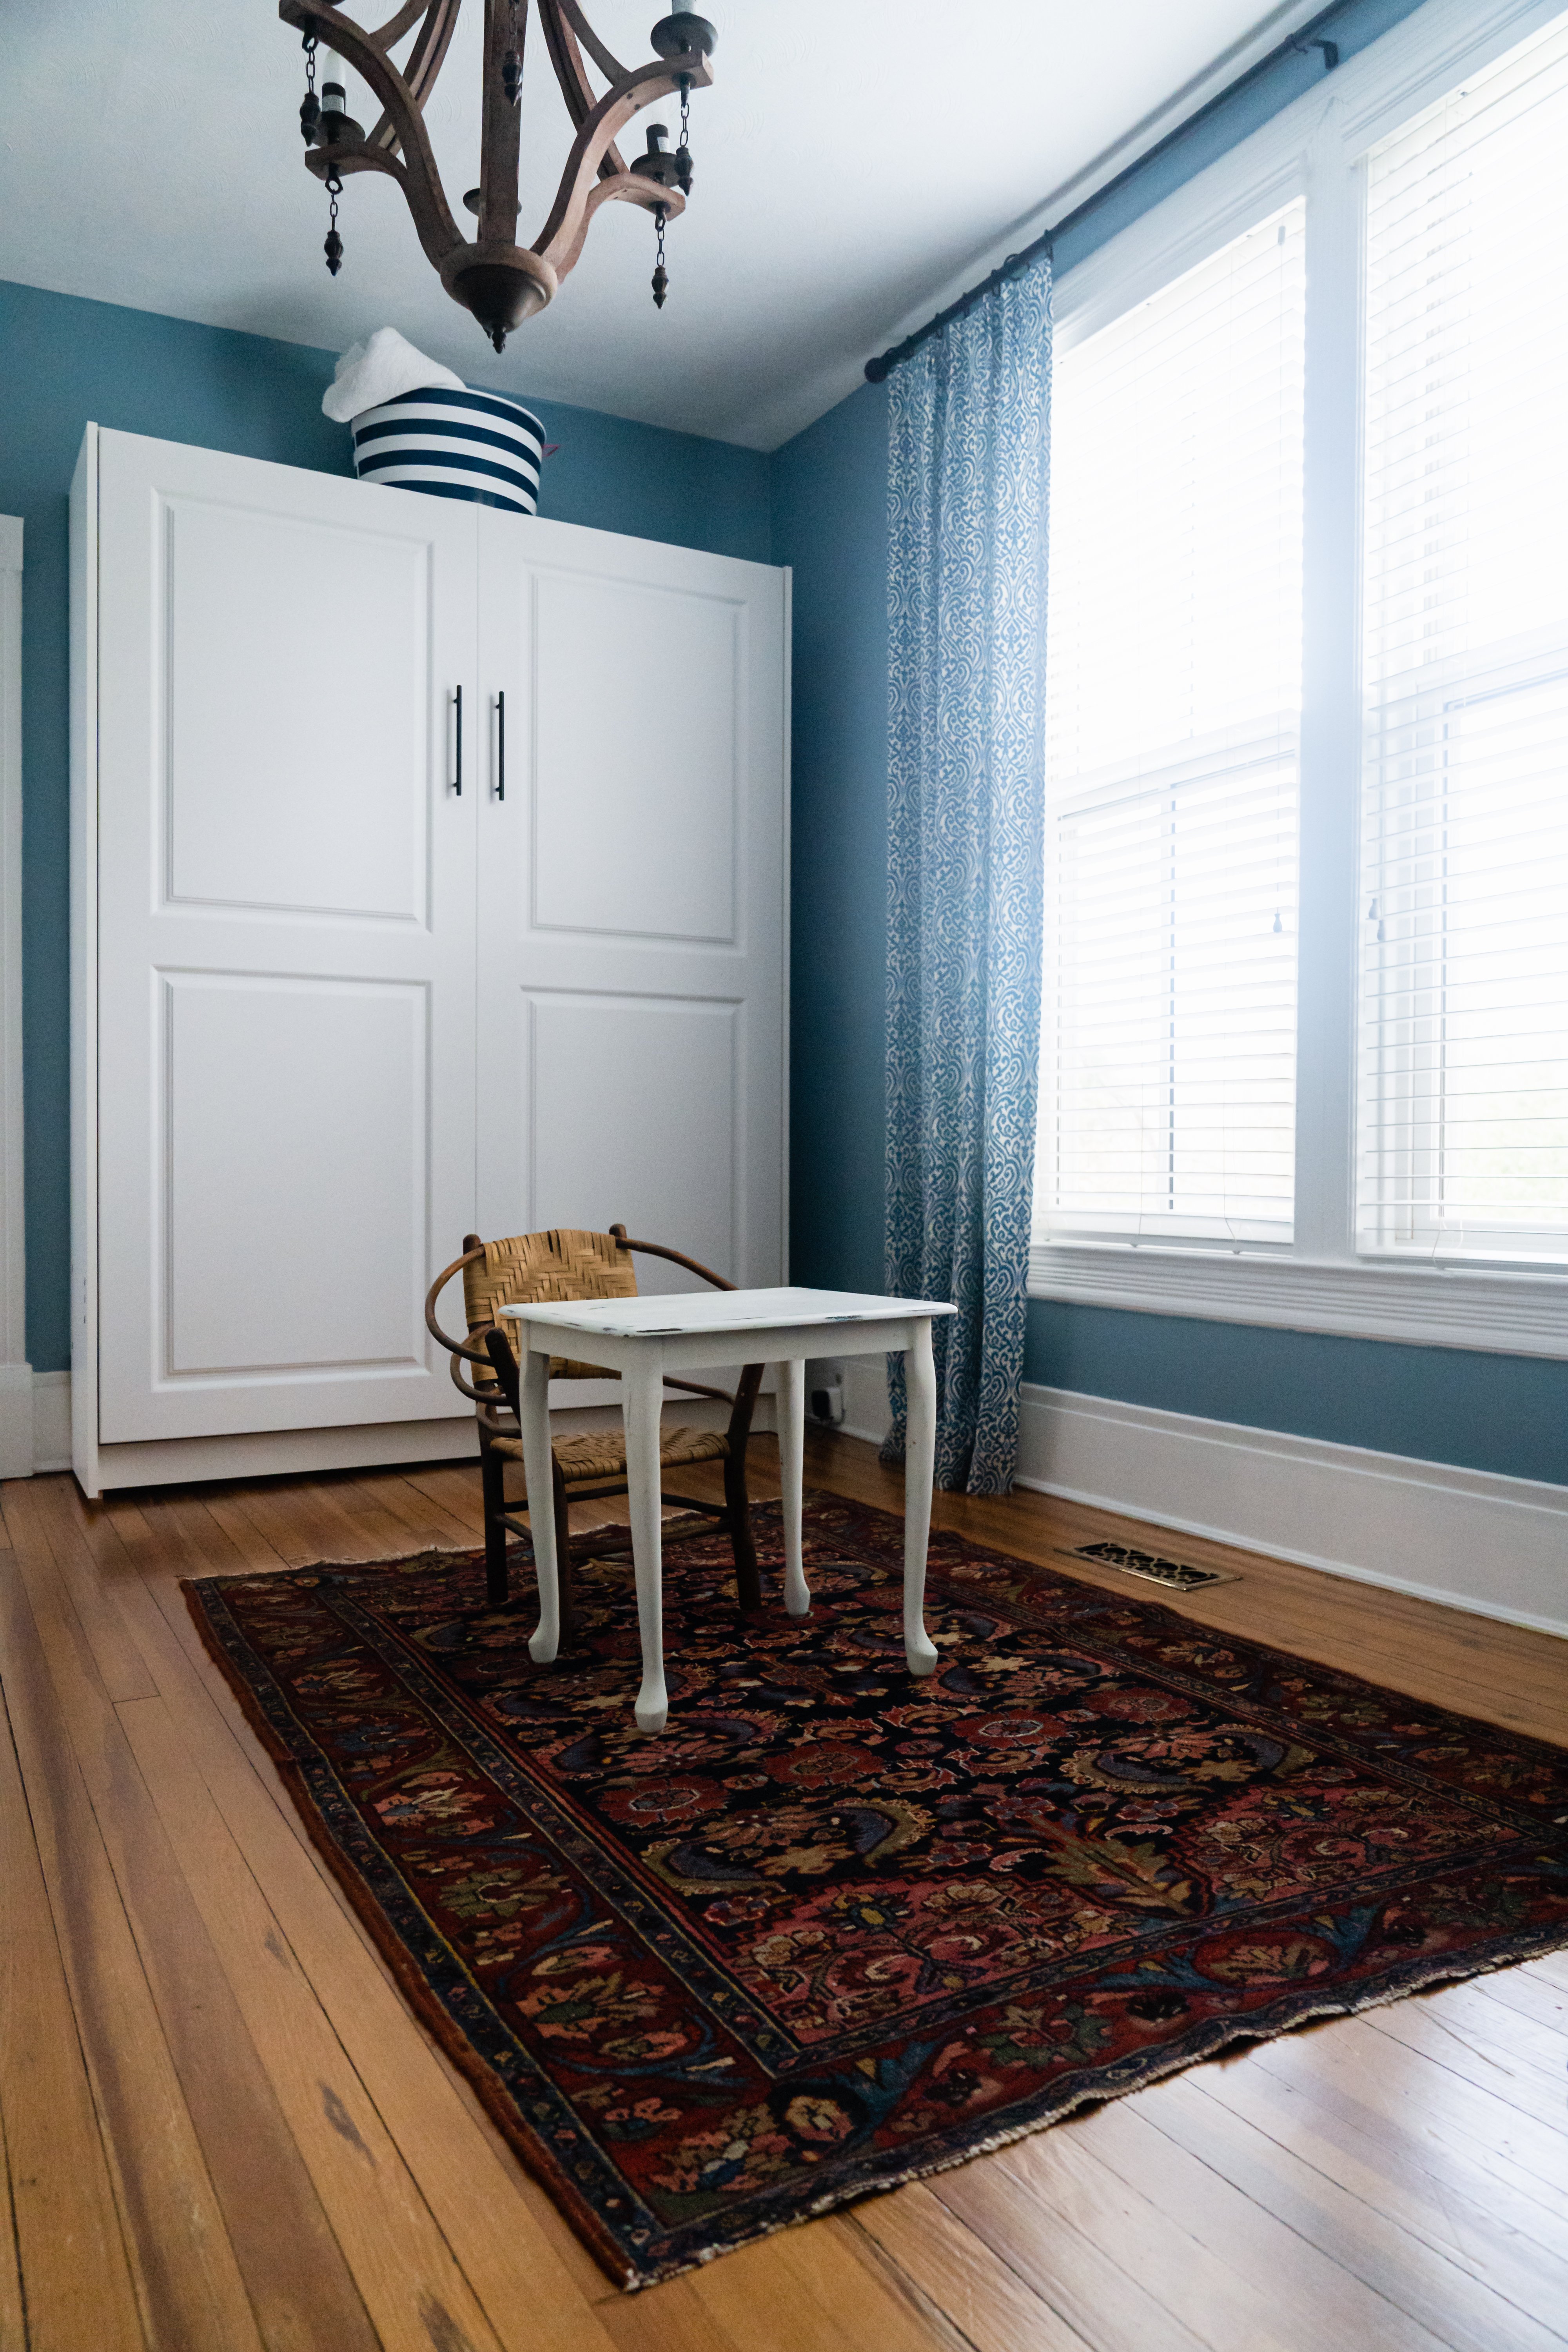 Open room with blue walls and white trim with hard wood floors